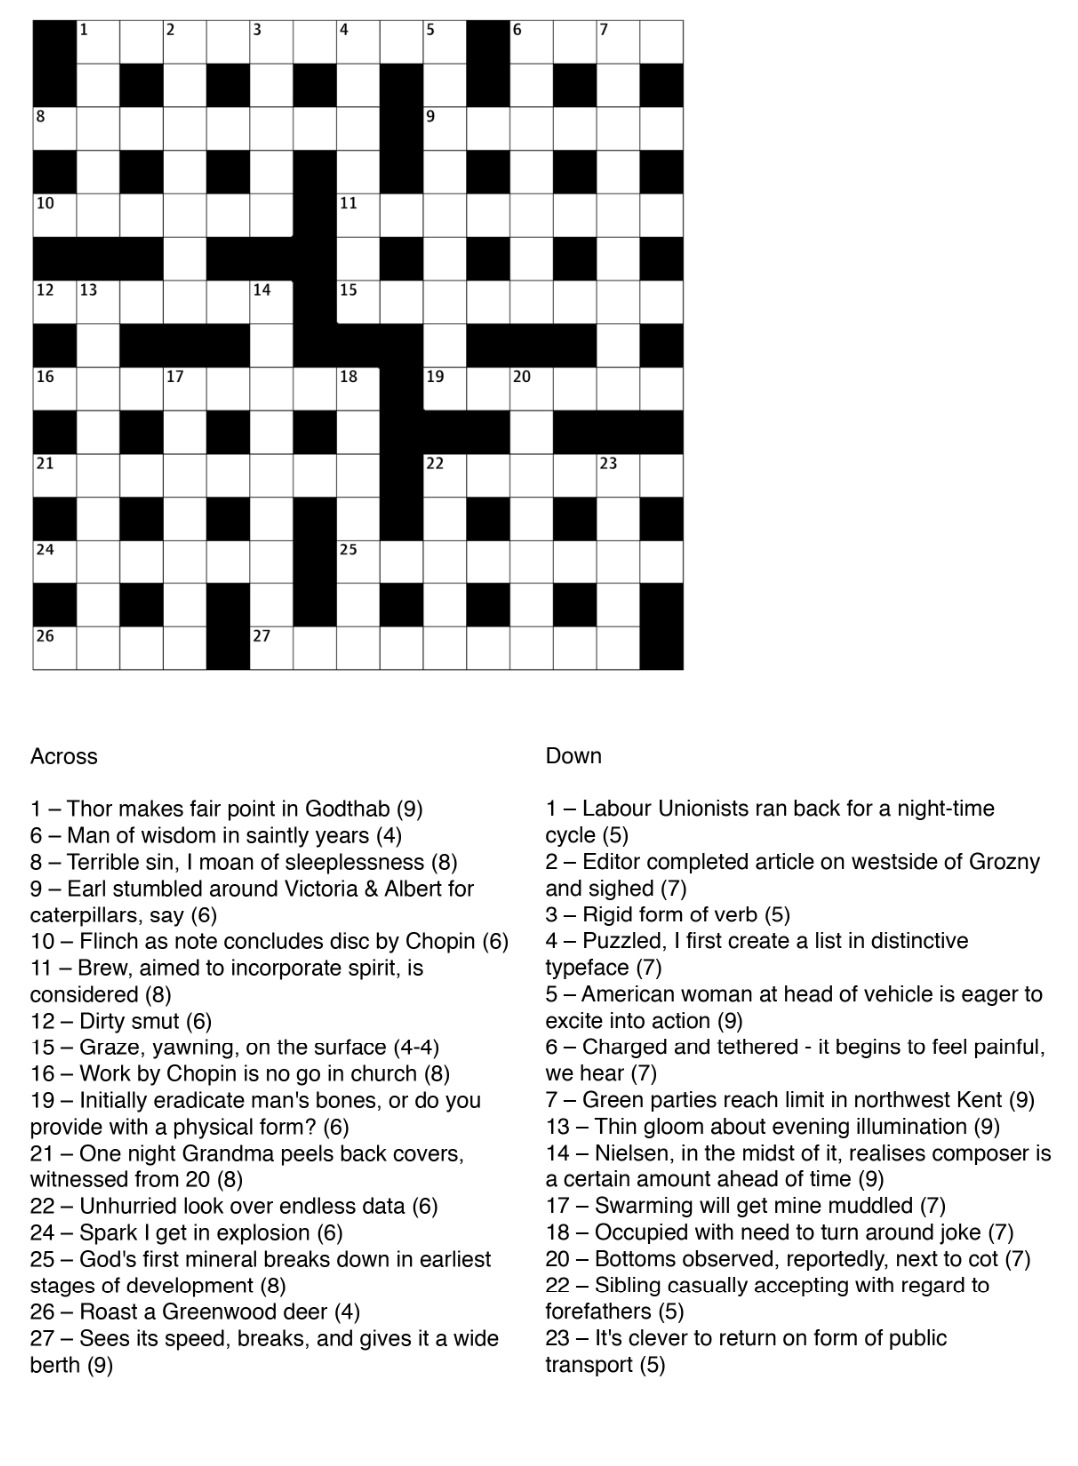 Printable Globe and Mail Cryptic Crossword_81690